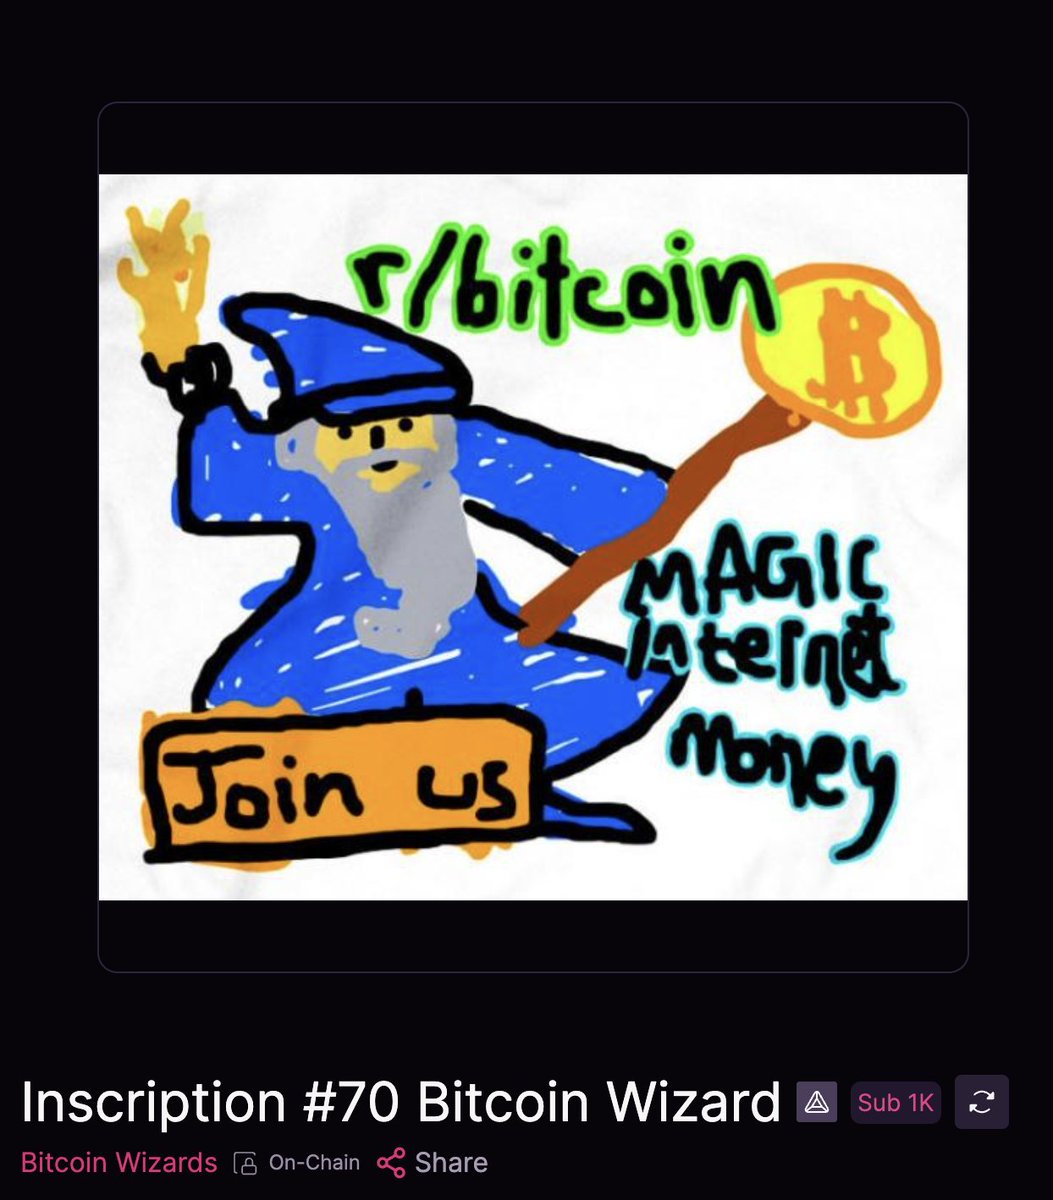 Absolutely thrilled to share that another milestone has been reached in the journey of the Bitcoin Wizard! Inscription #70 has found its place among the esteemed ranks of the historical Bitcoin Wizard collection. It's moments like these that truly affirm the lasting impact and…